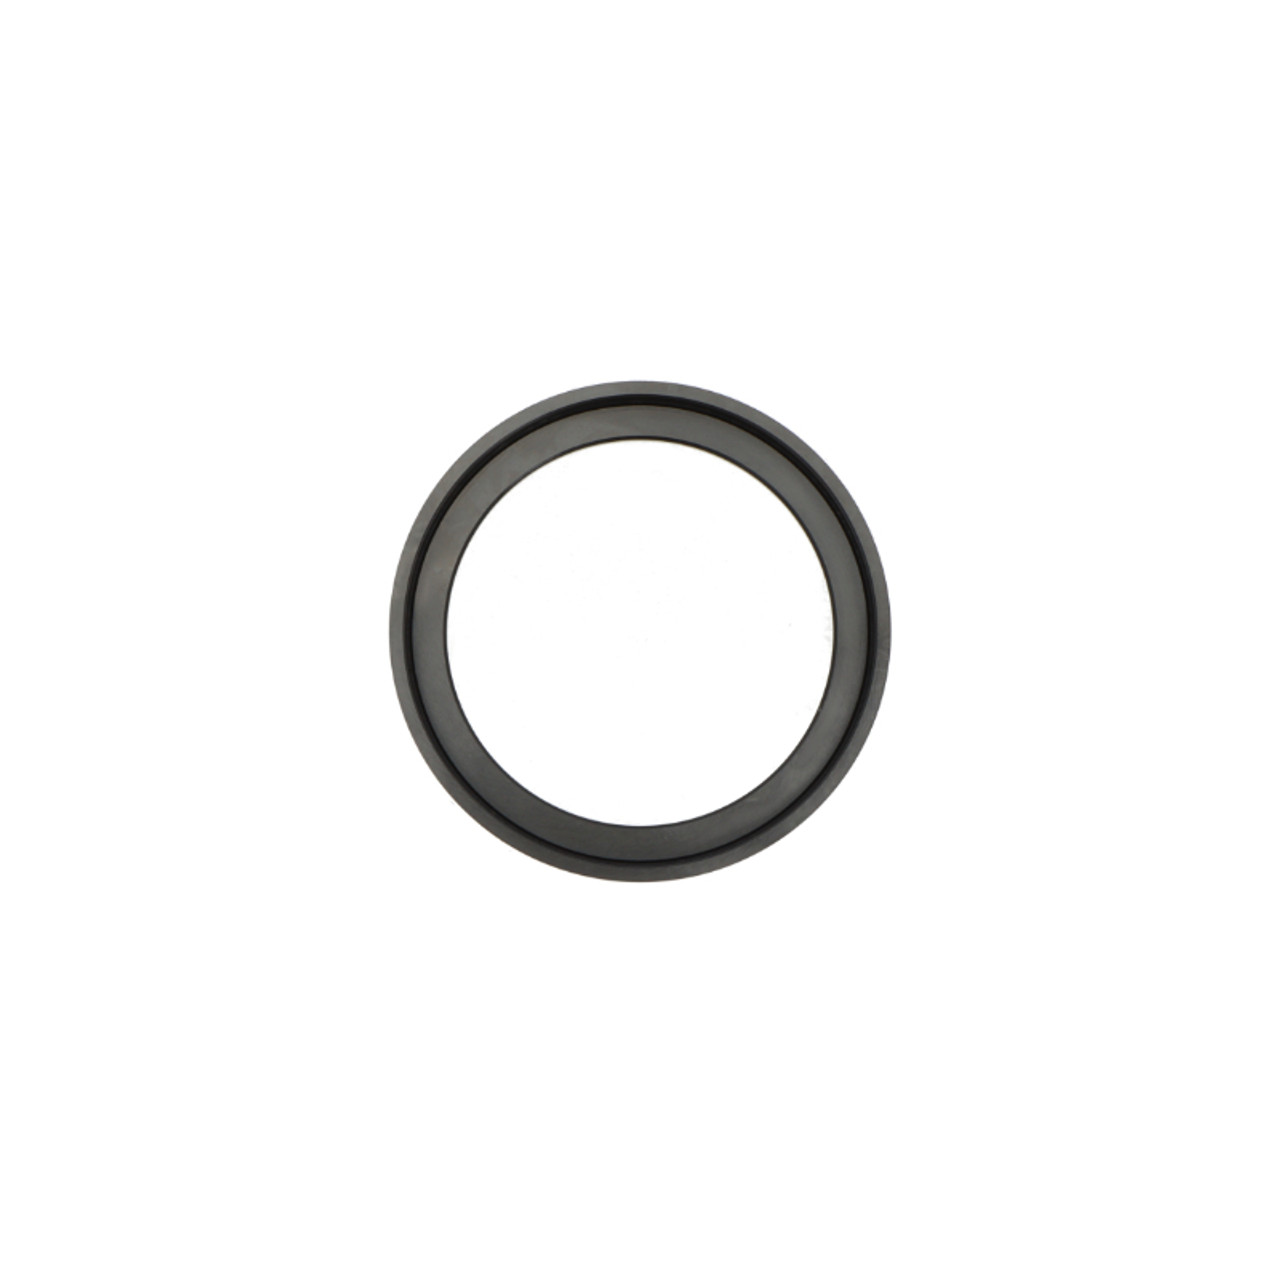 L-section rings HJ1044